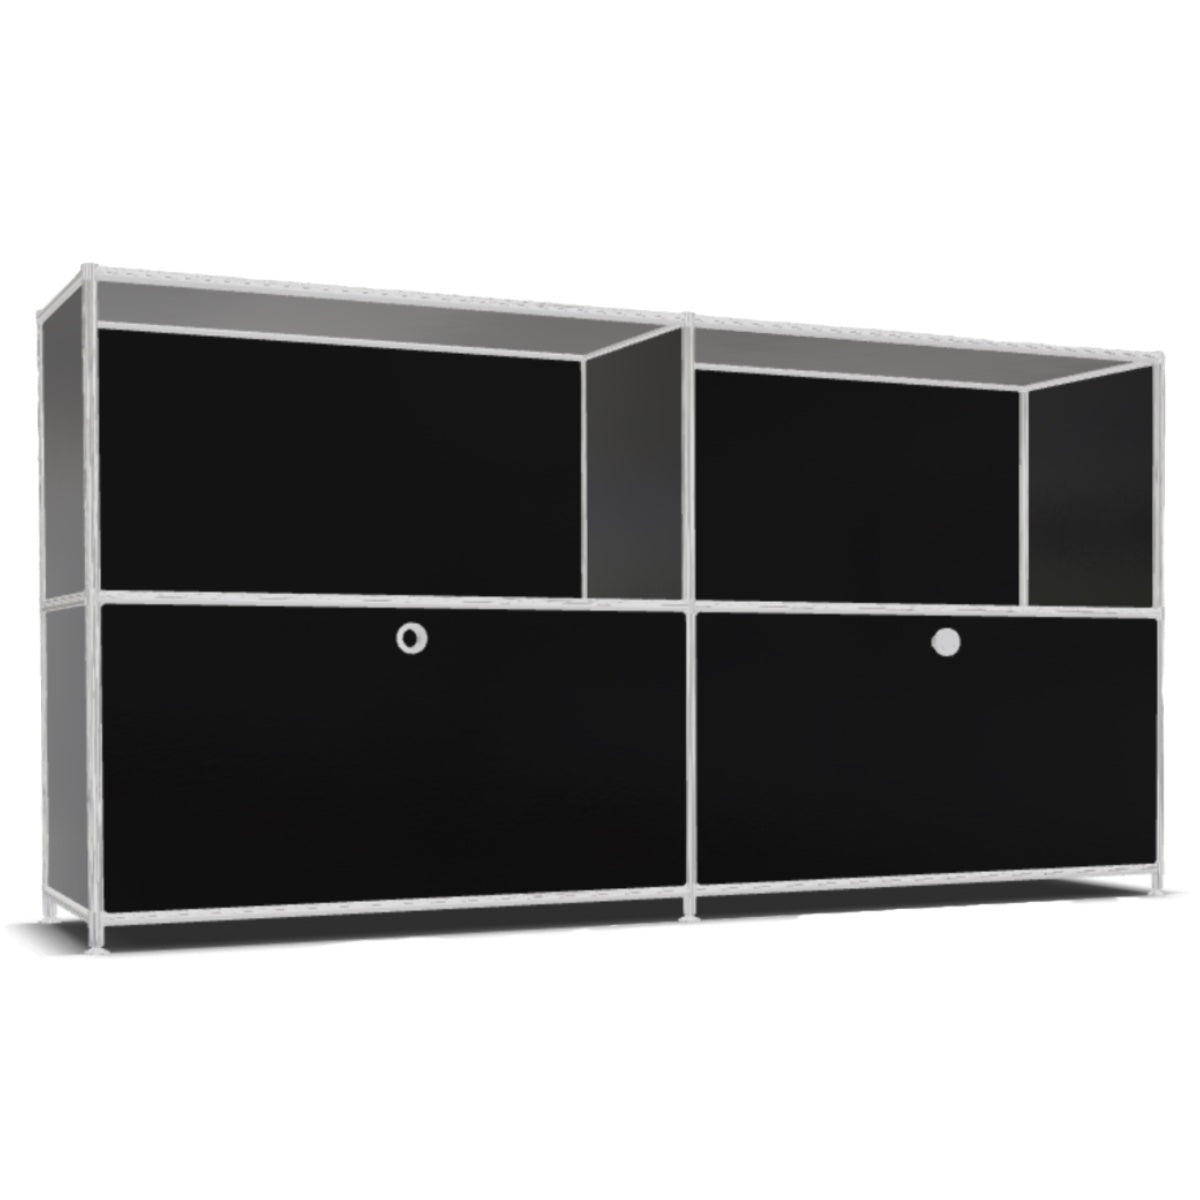 System4 Sideboard with Drawers, 153 x 80 x 40 cm, Black